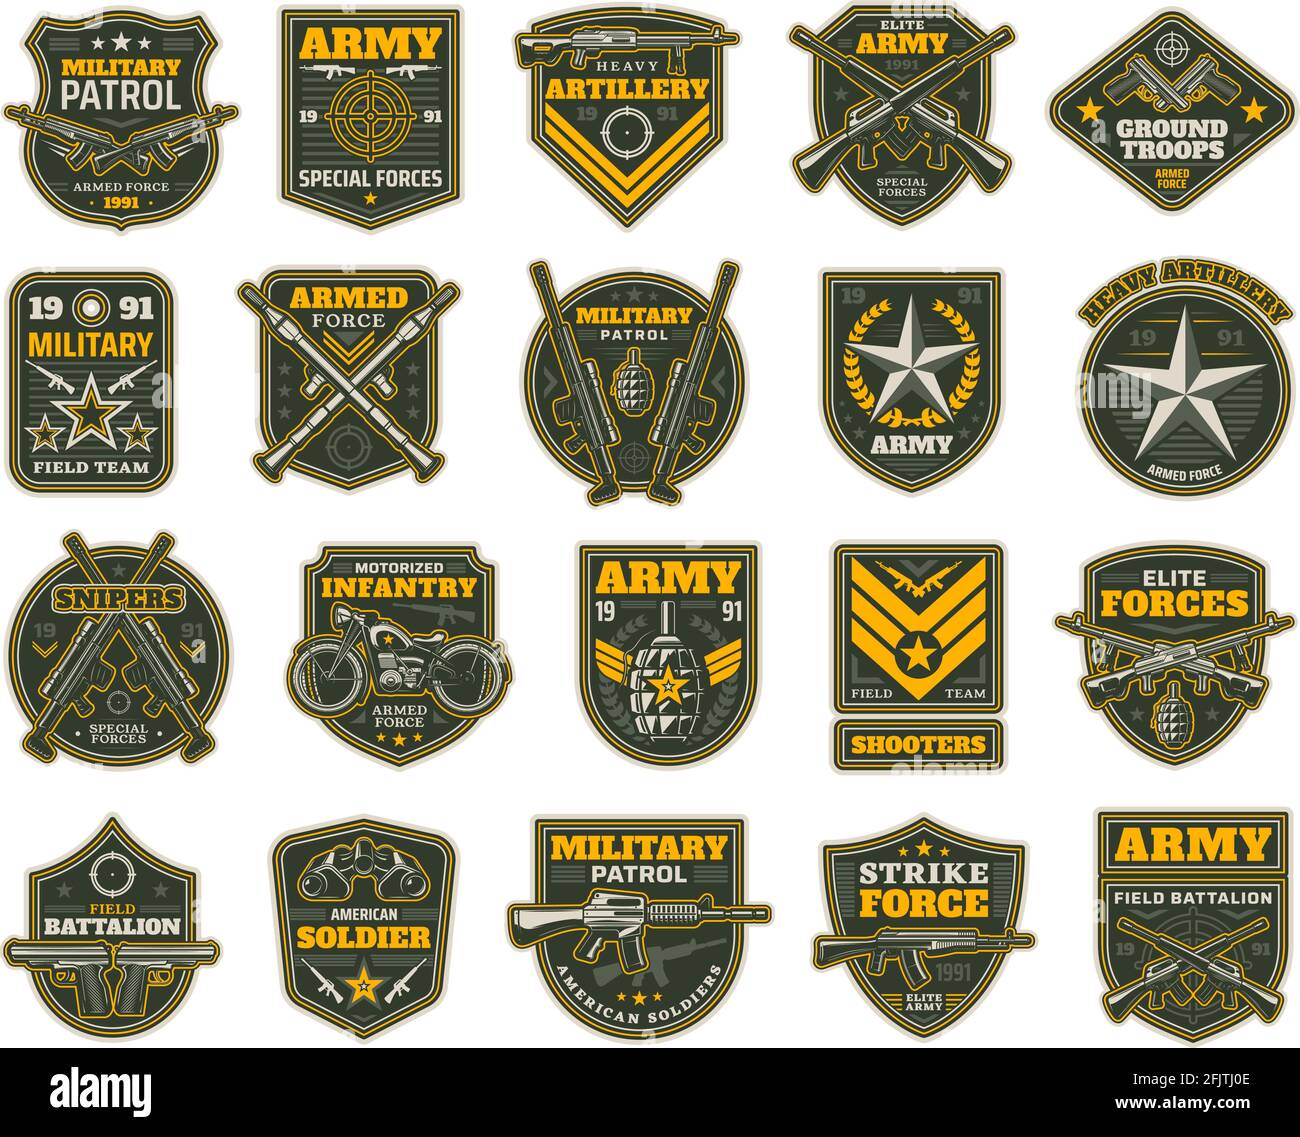 Military and army patches or icons, vector chevrons for sniper, shooter, motorized infantry and elite forces. Field battalion, shooters and military p Stock Vector